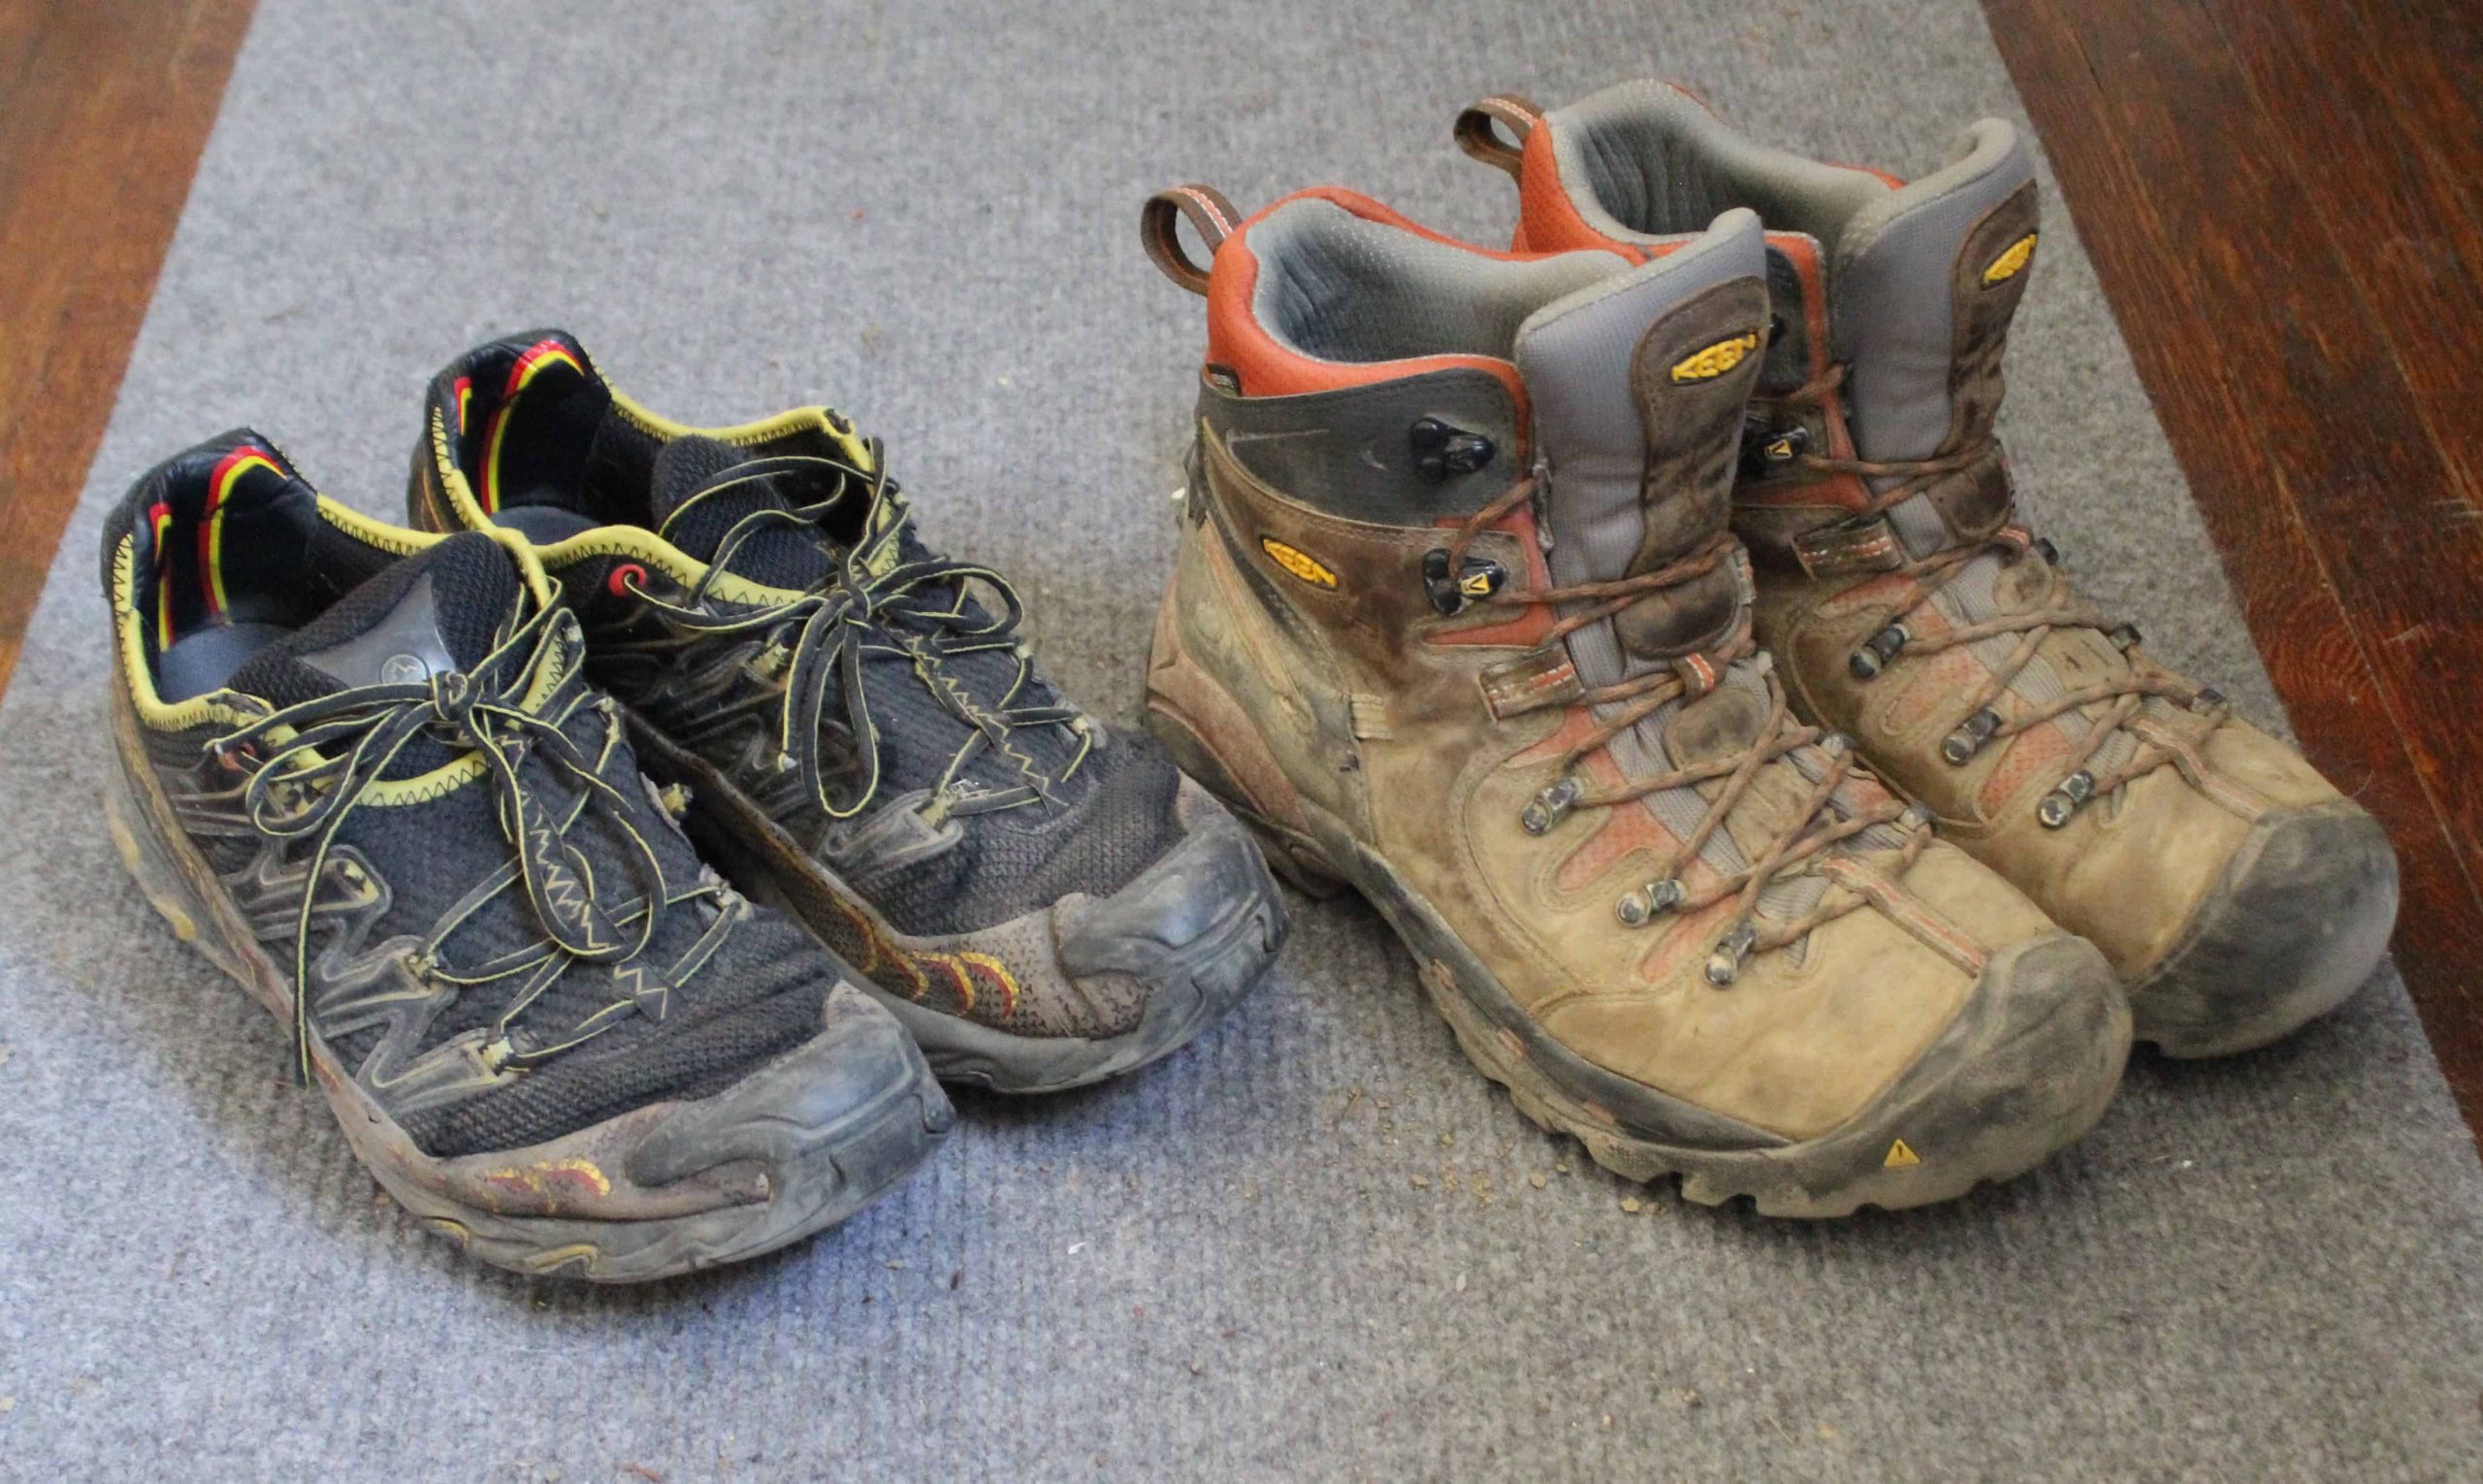 using trail running shoes for hiking